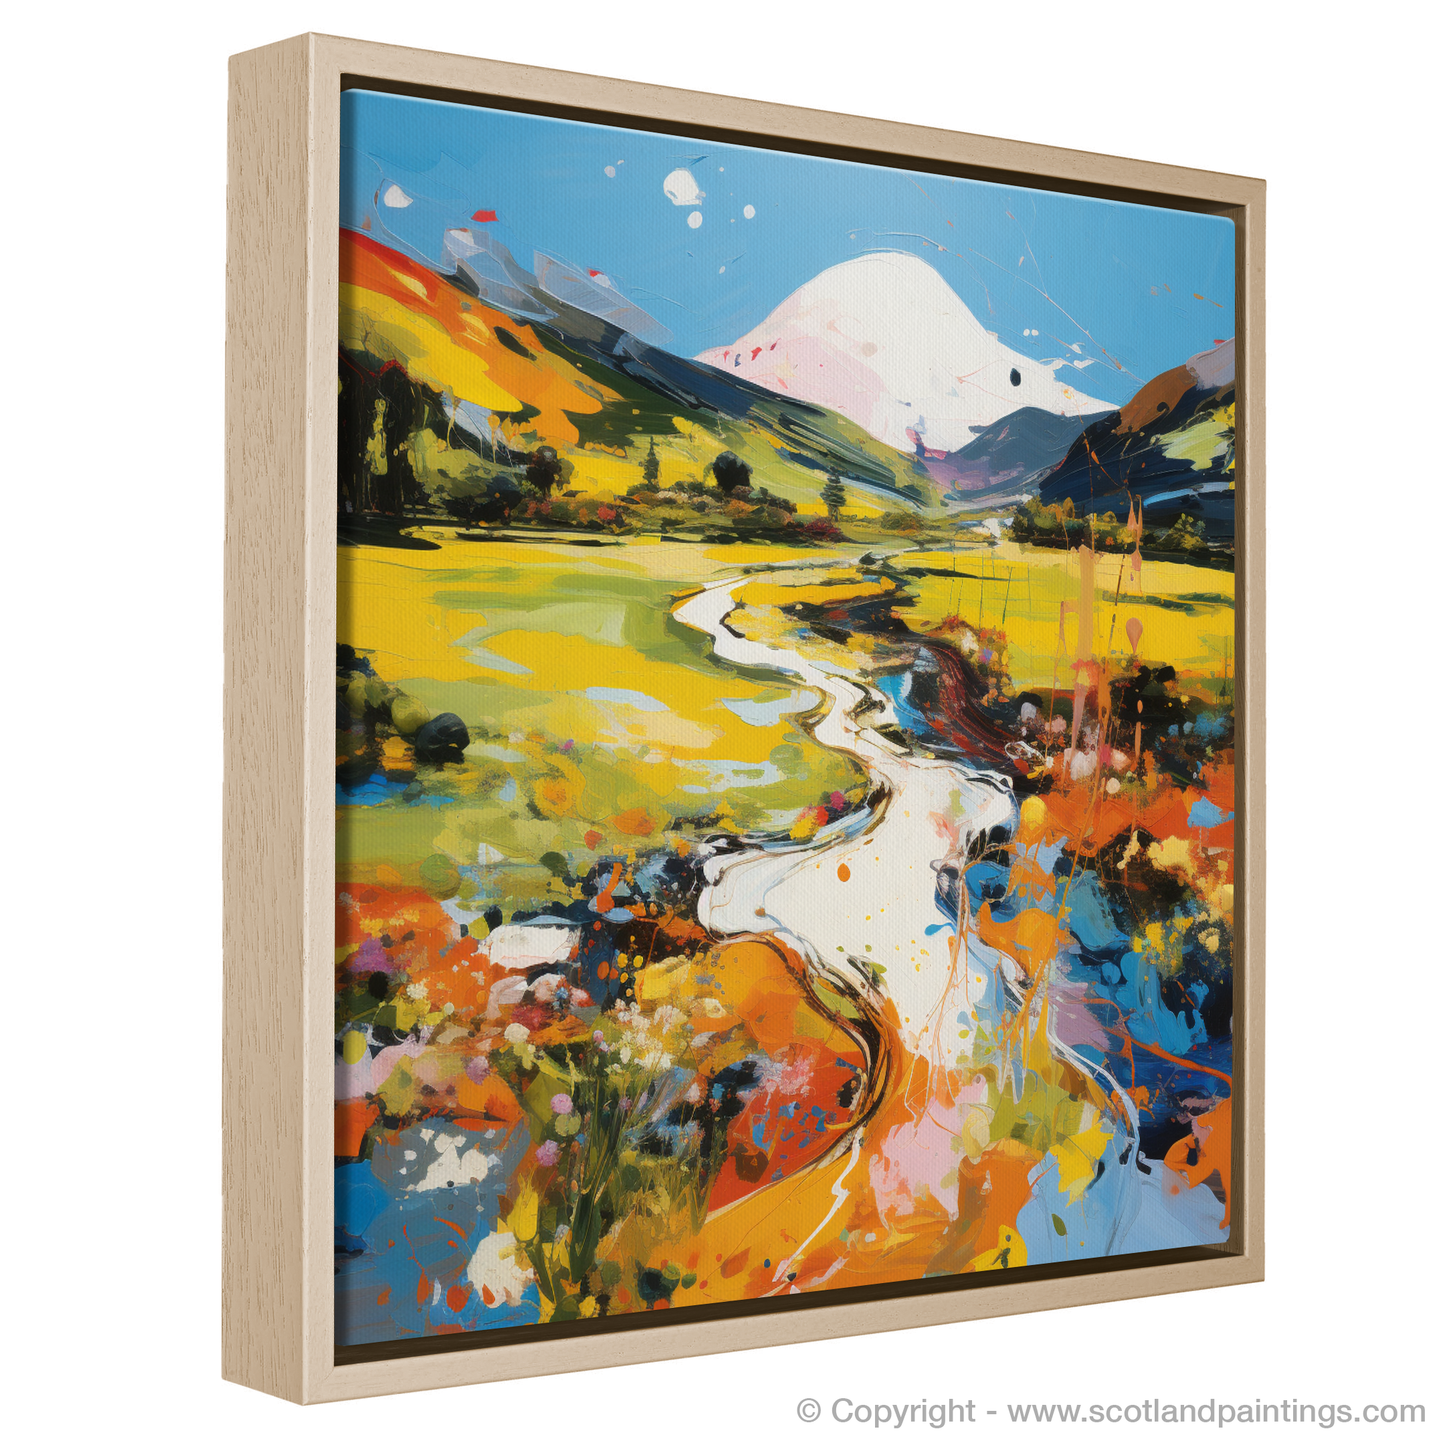 Painting and Art Print of Glen Roy, Highlands in summer entitled "Vivid Glen Roy: A Highland Summer Abstract".